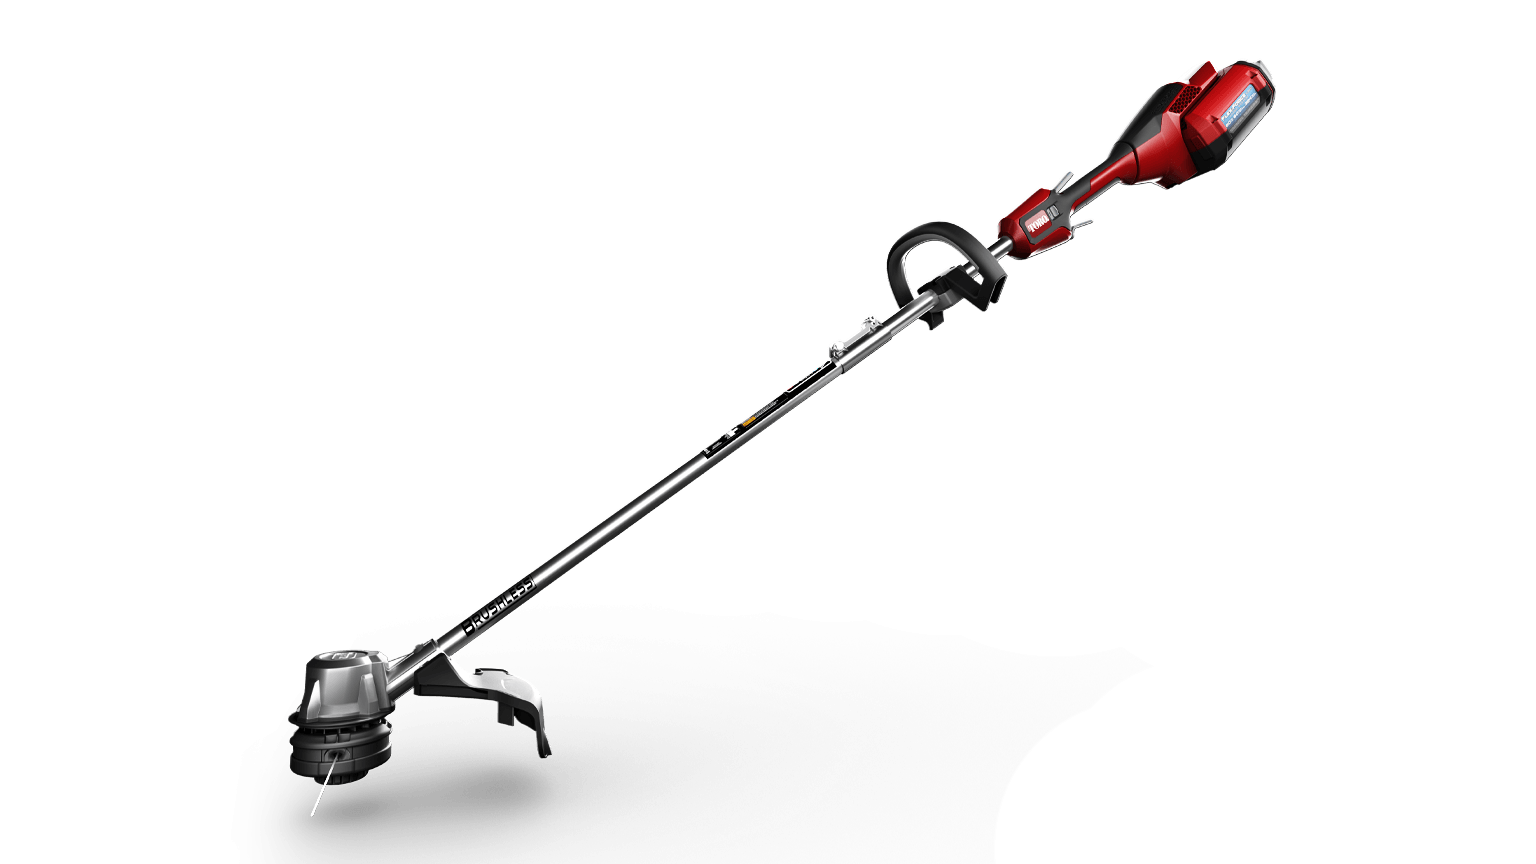 Toro 60V MAX* Revolution Electric Battery PRO String Trimmer (Tool Only)  (66110T)